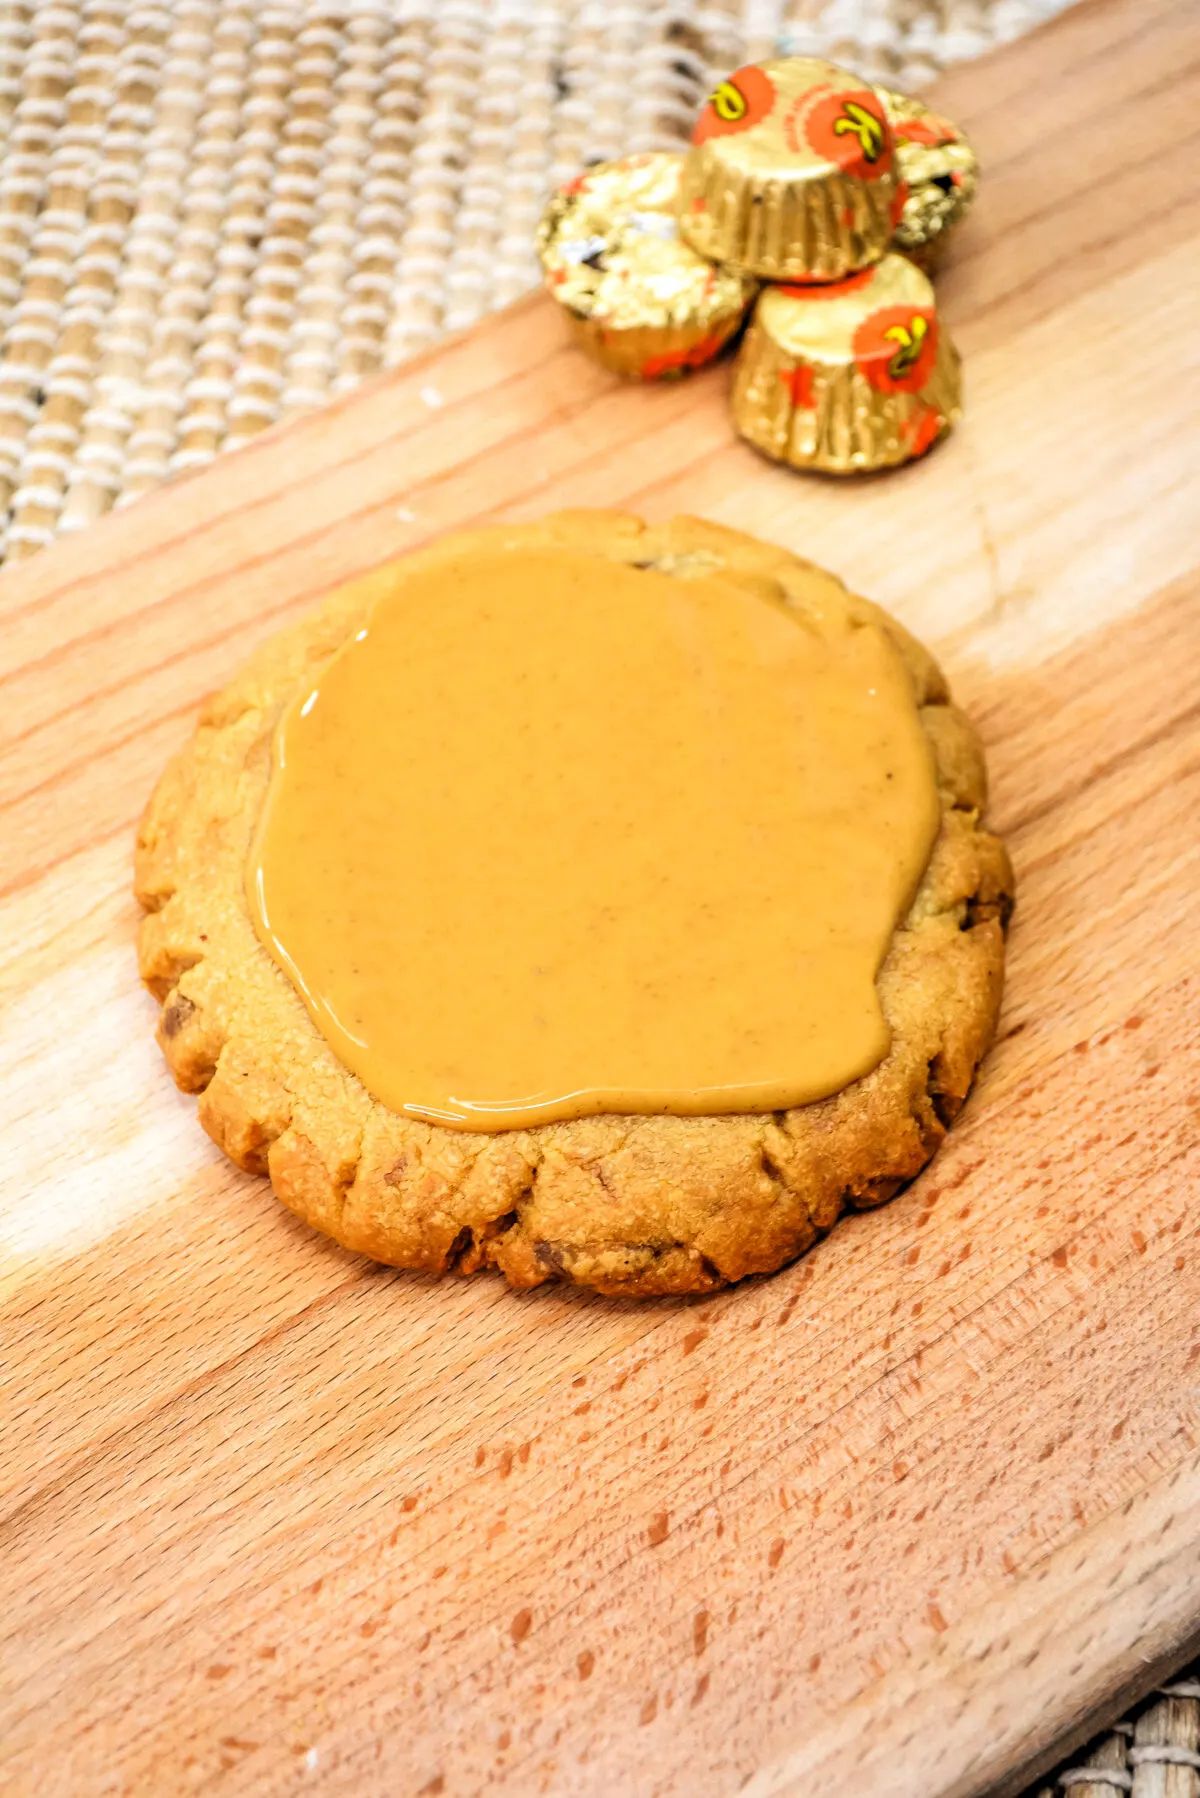 Peanut butter melted on top of the cookies.